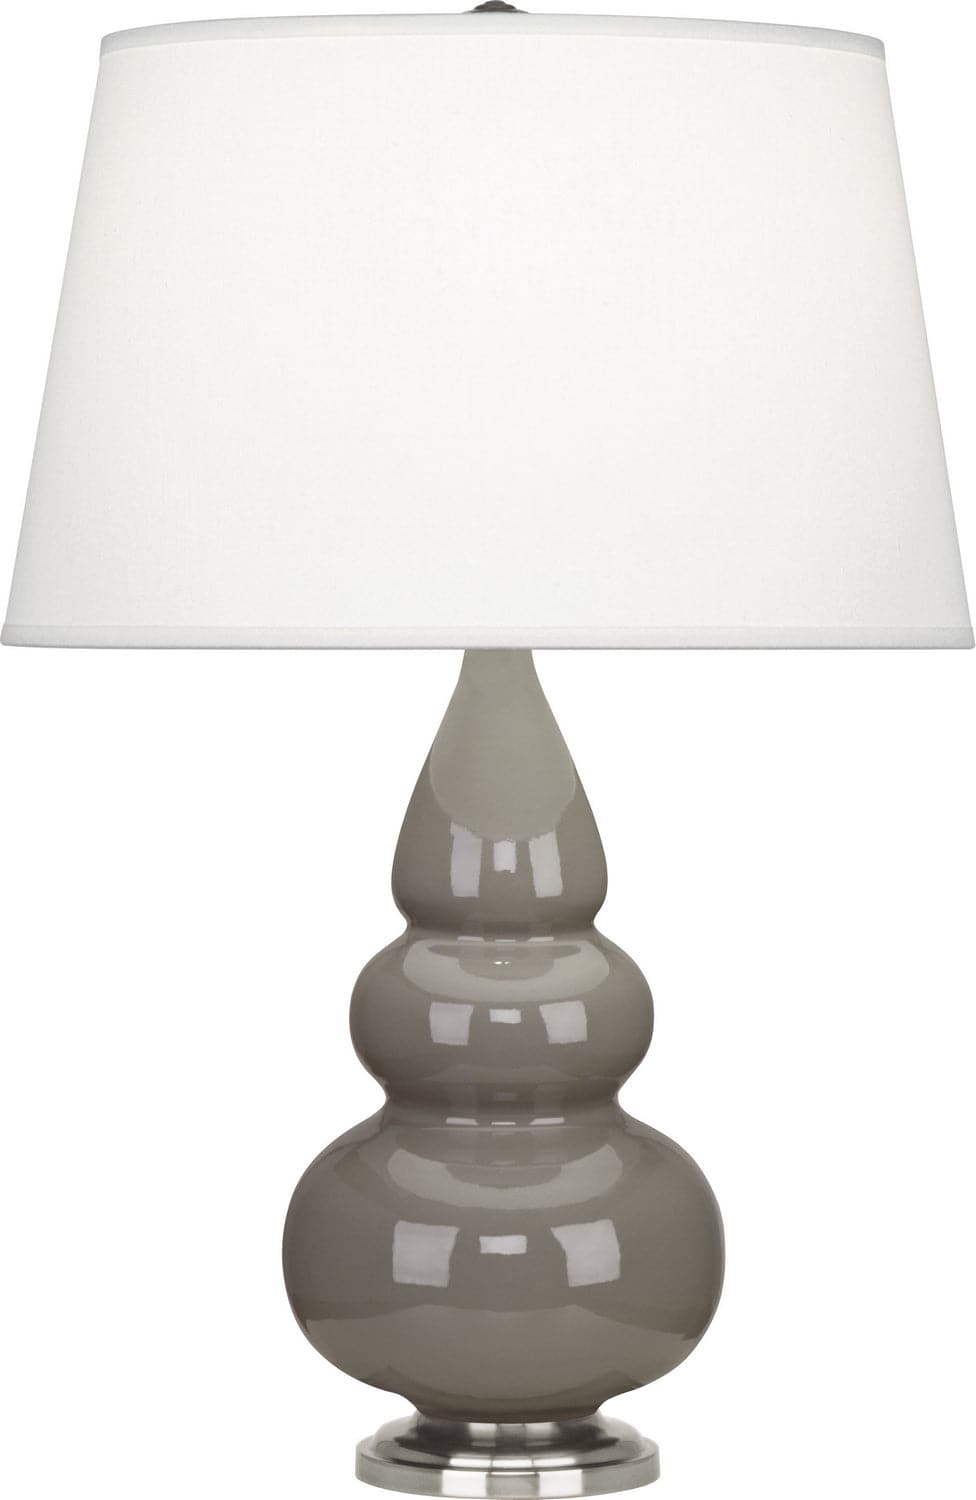 Robert Abbey - 289X - One Light Accent Lamp - Small Triple Gourd - Smoky Taupe Glazed w/Antique Silver